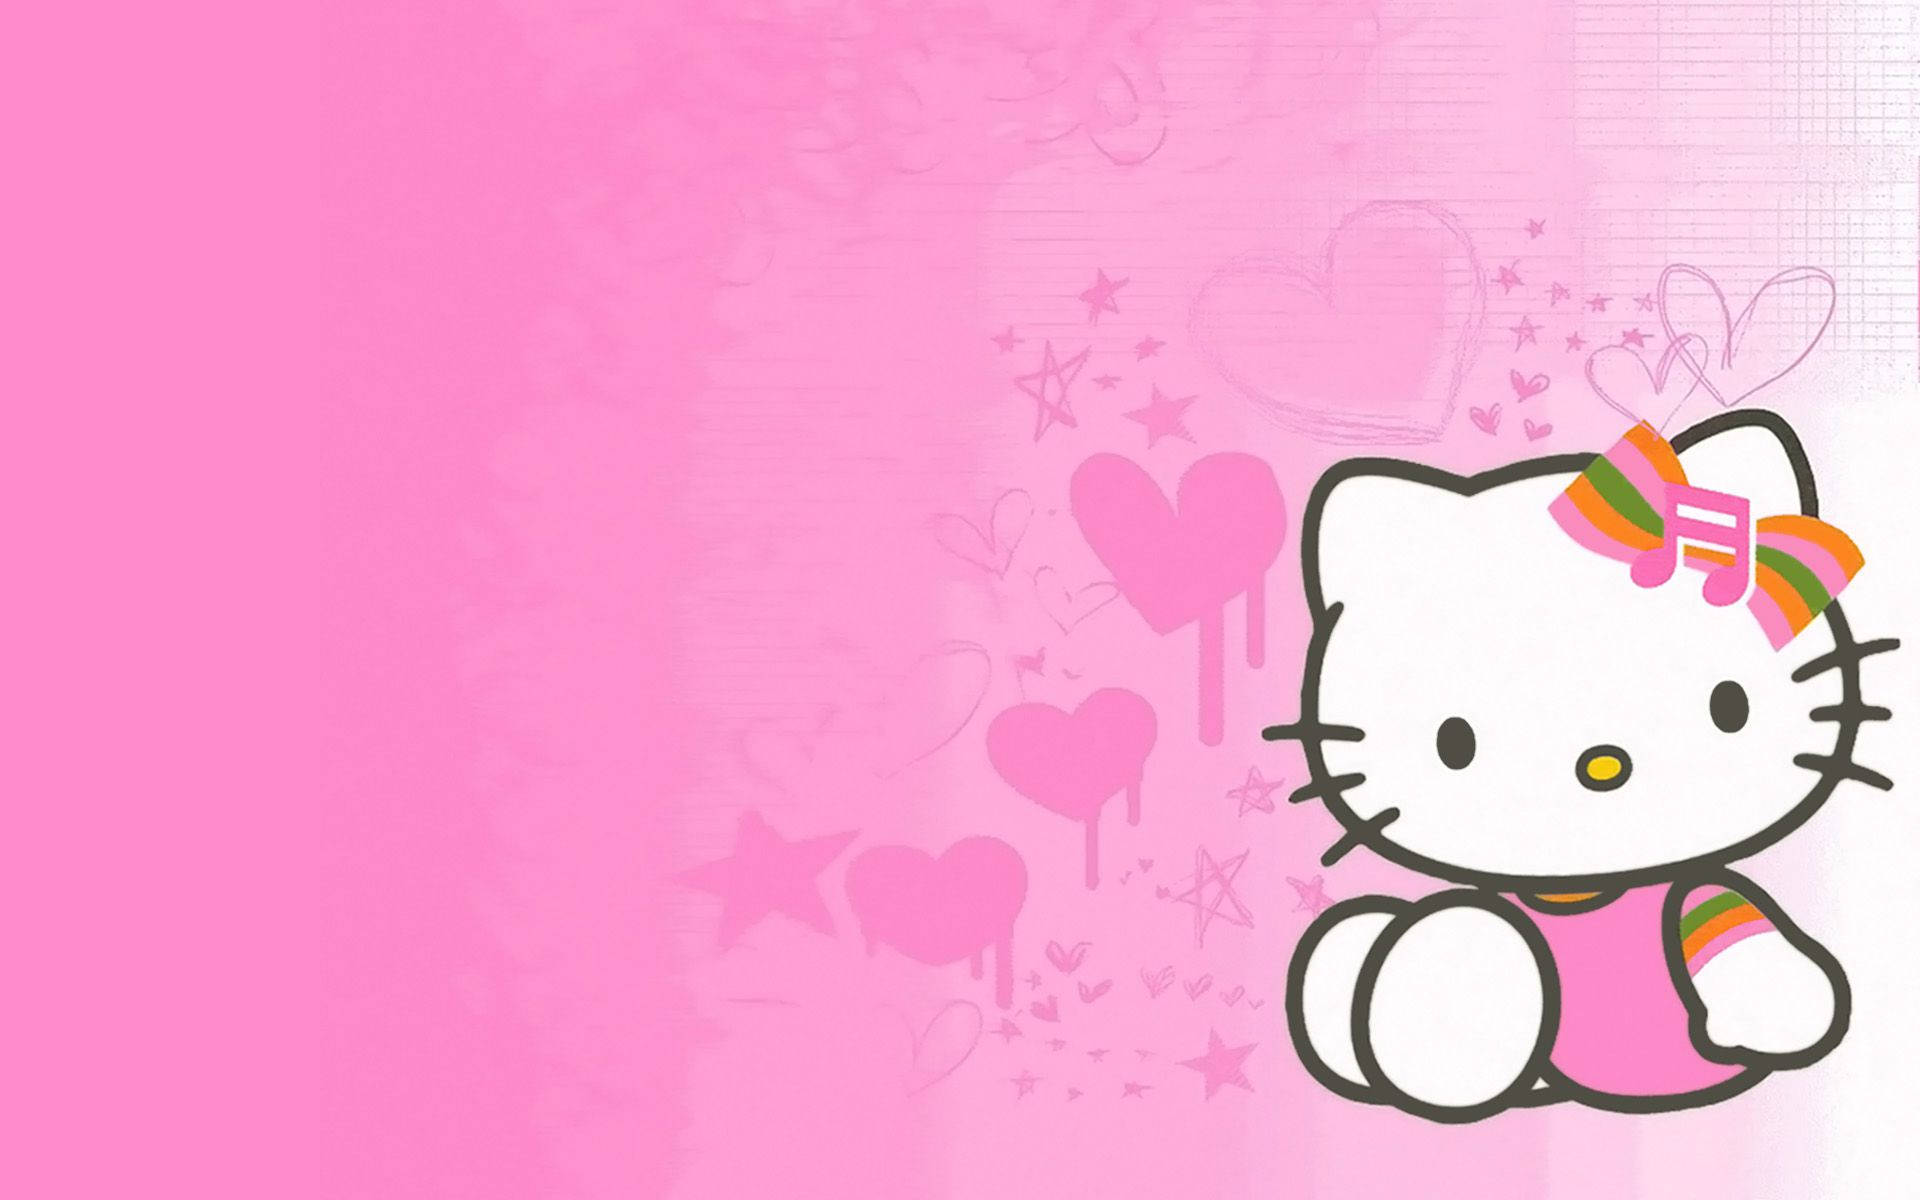 Hello Kitty Wallpapers and Backgrounds - WallpaperCG